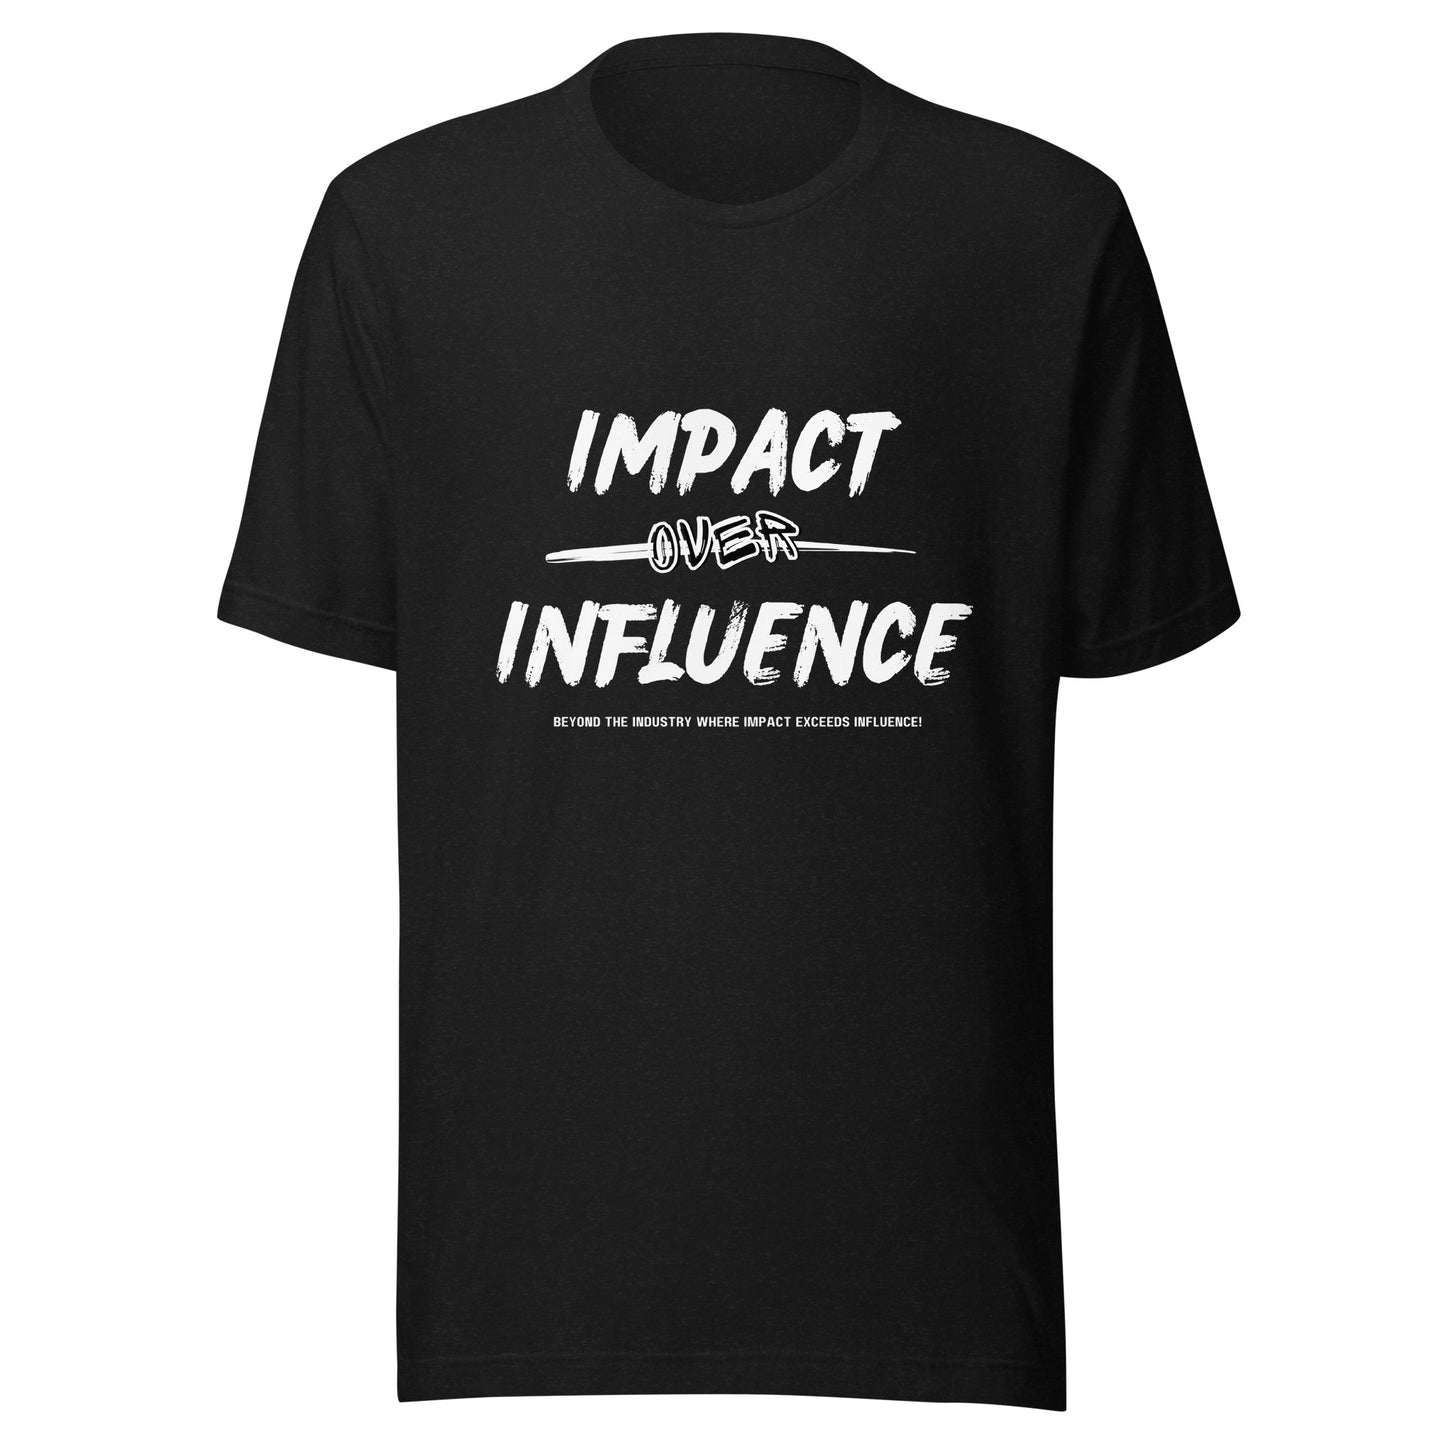 IMPACT OVER INFLUENCE (BW)